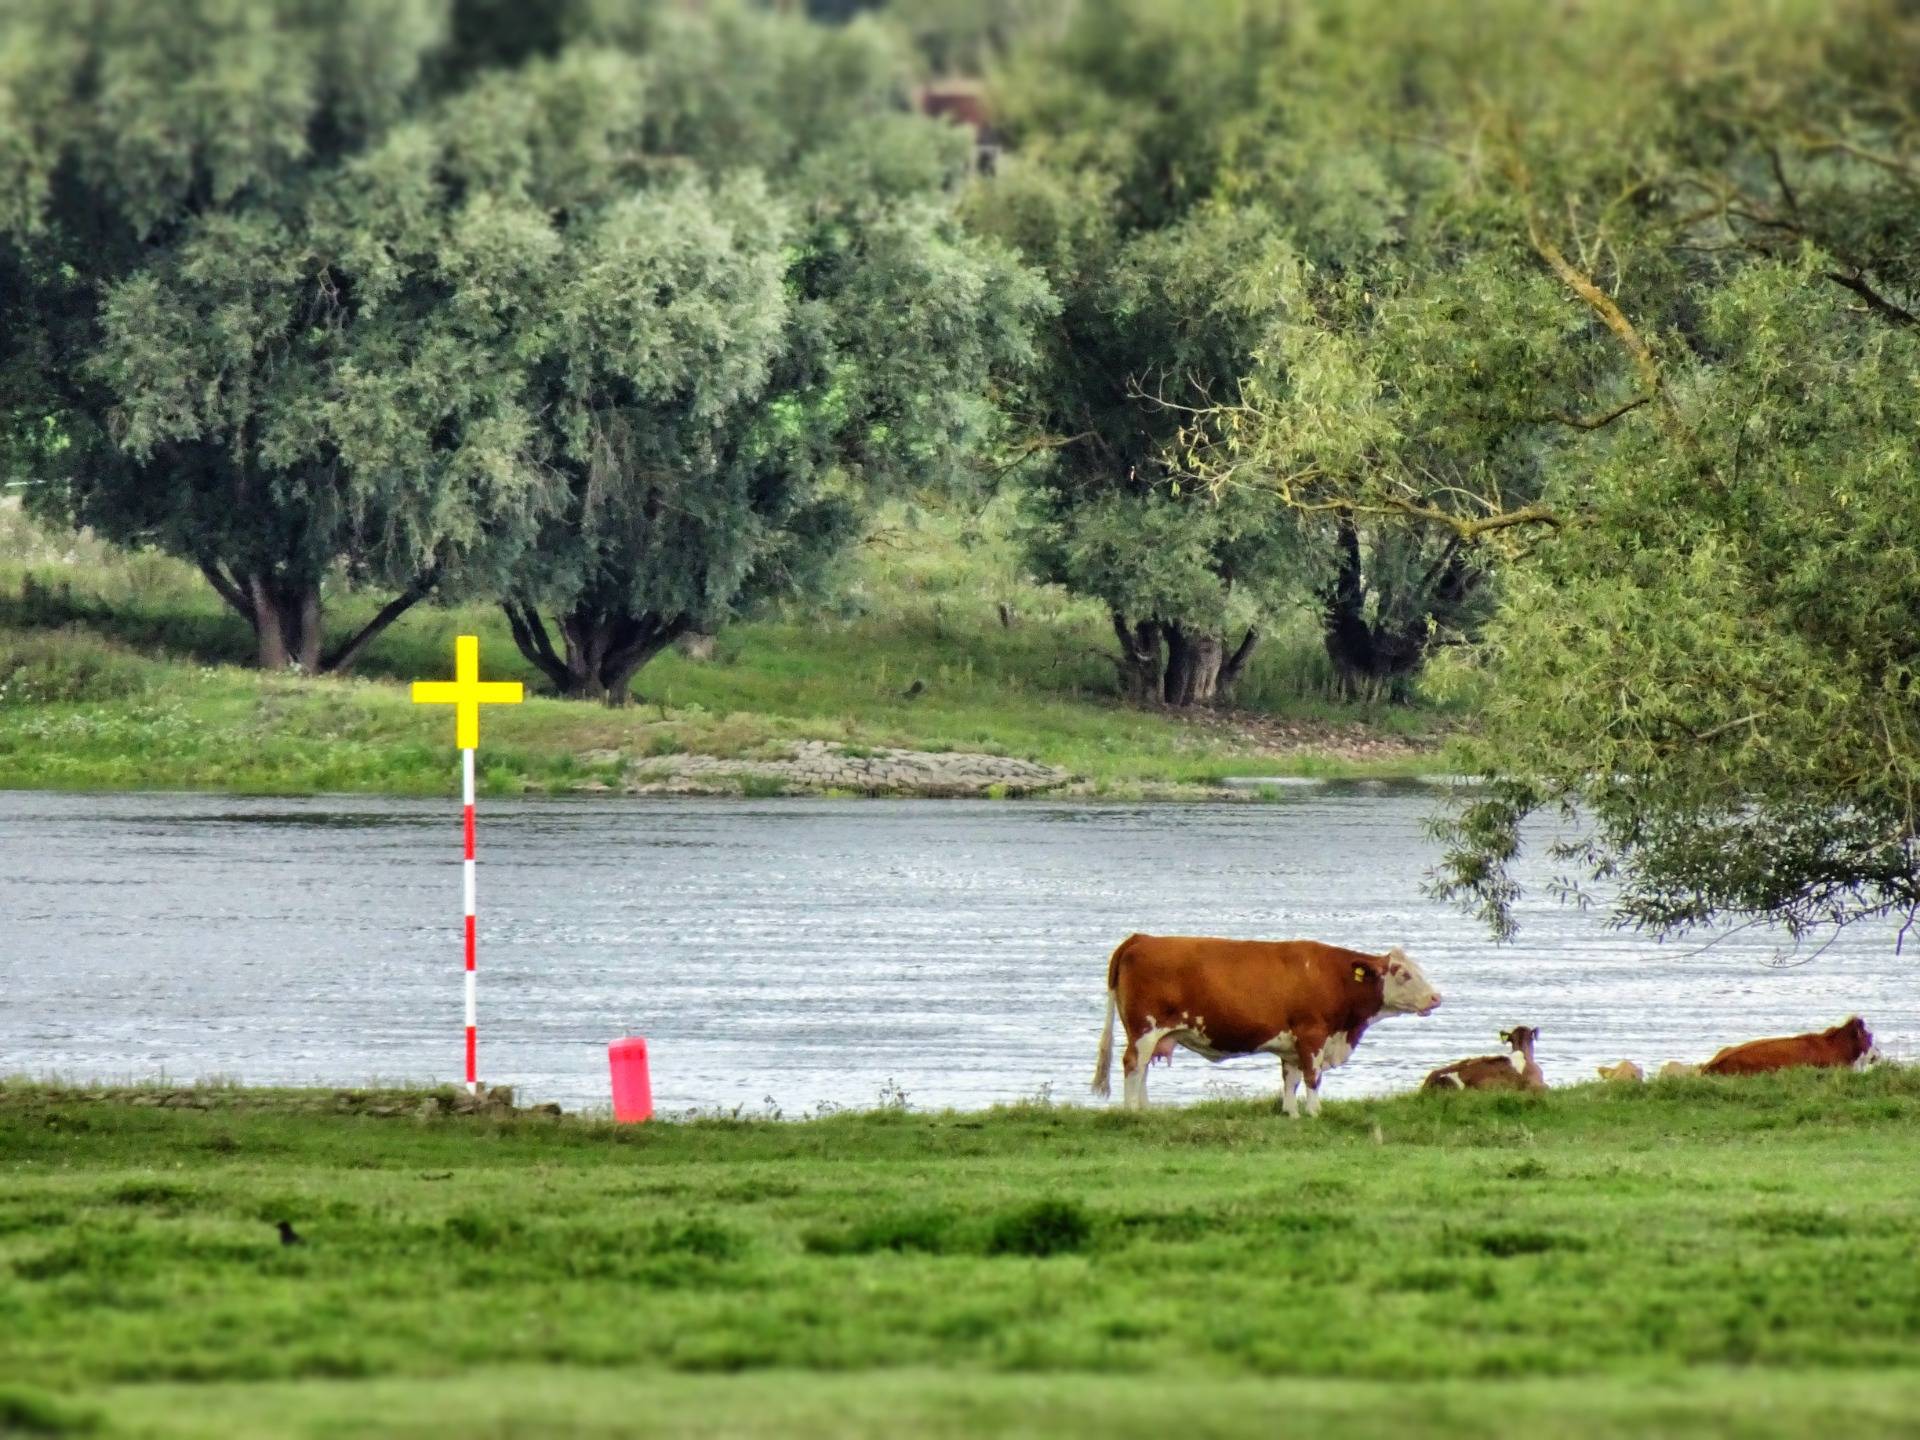 The river Elbe and his rulers: Cows.